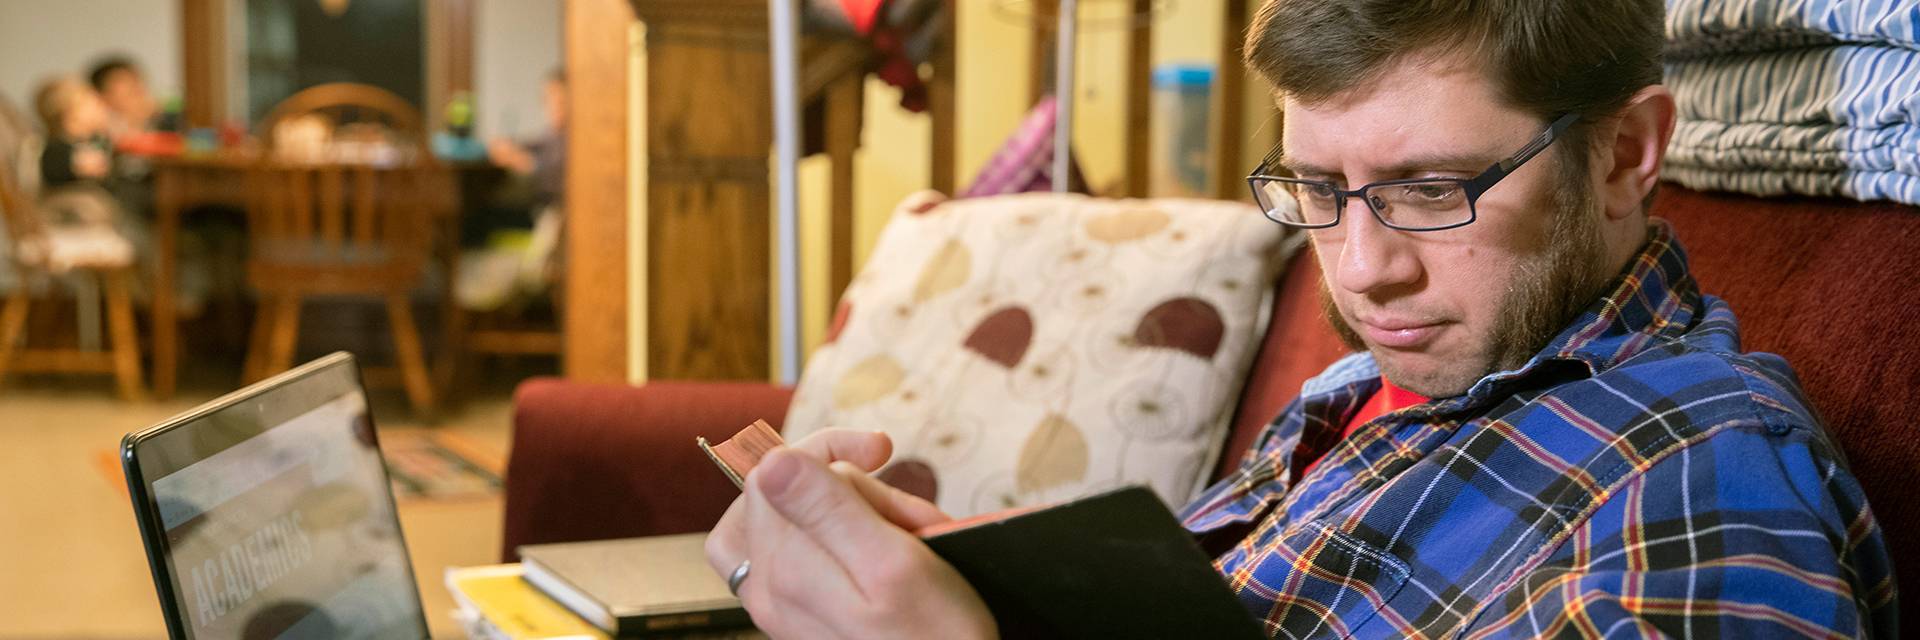 UND student studying at home